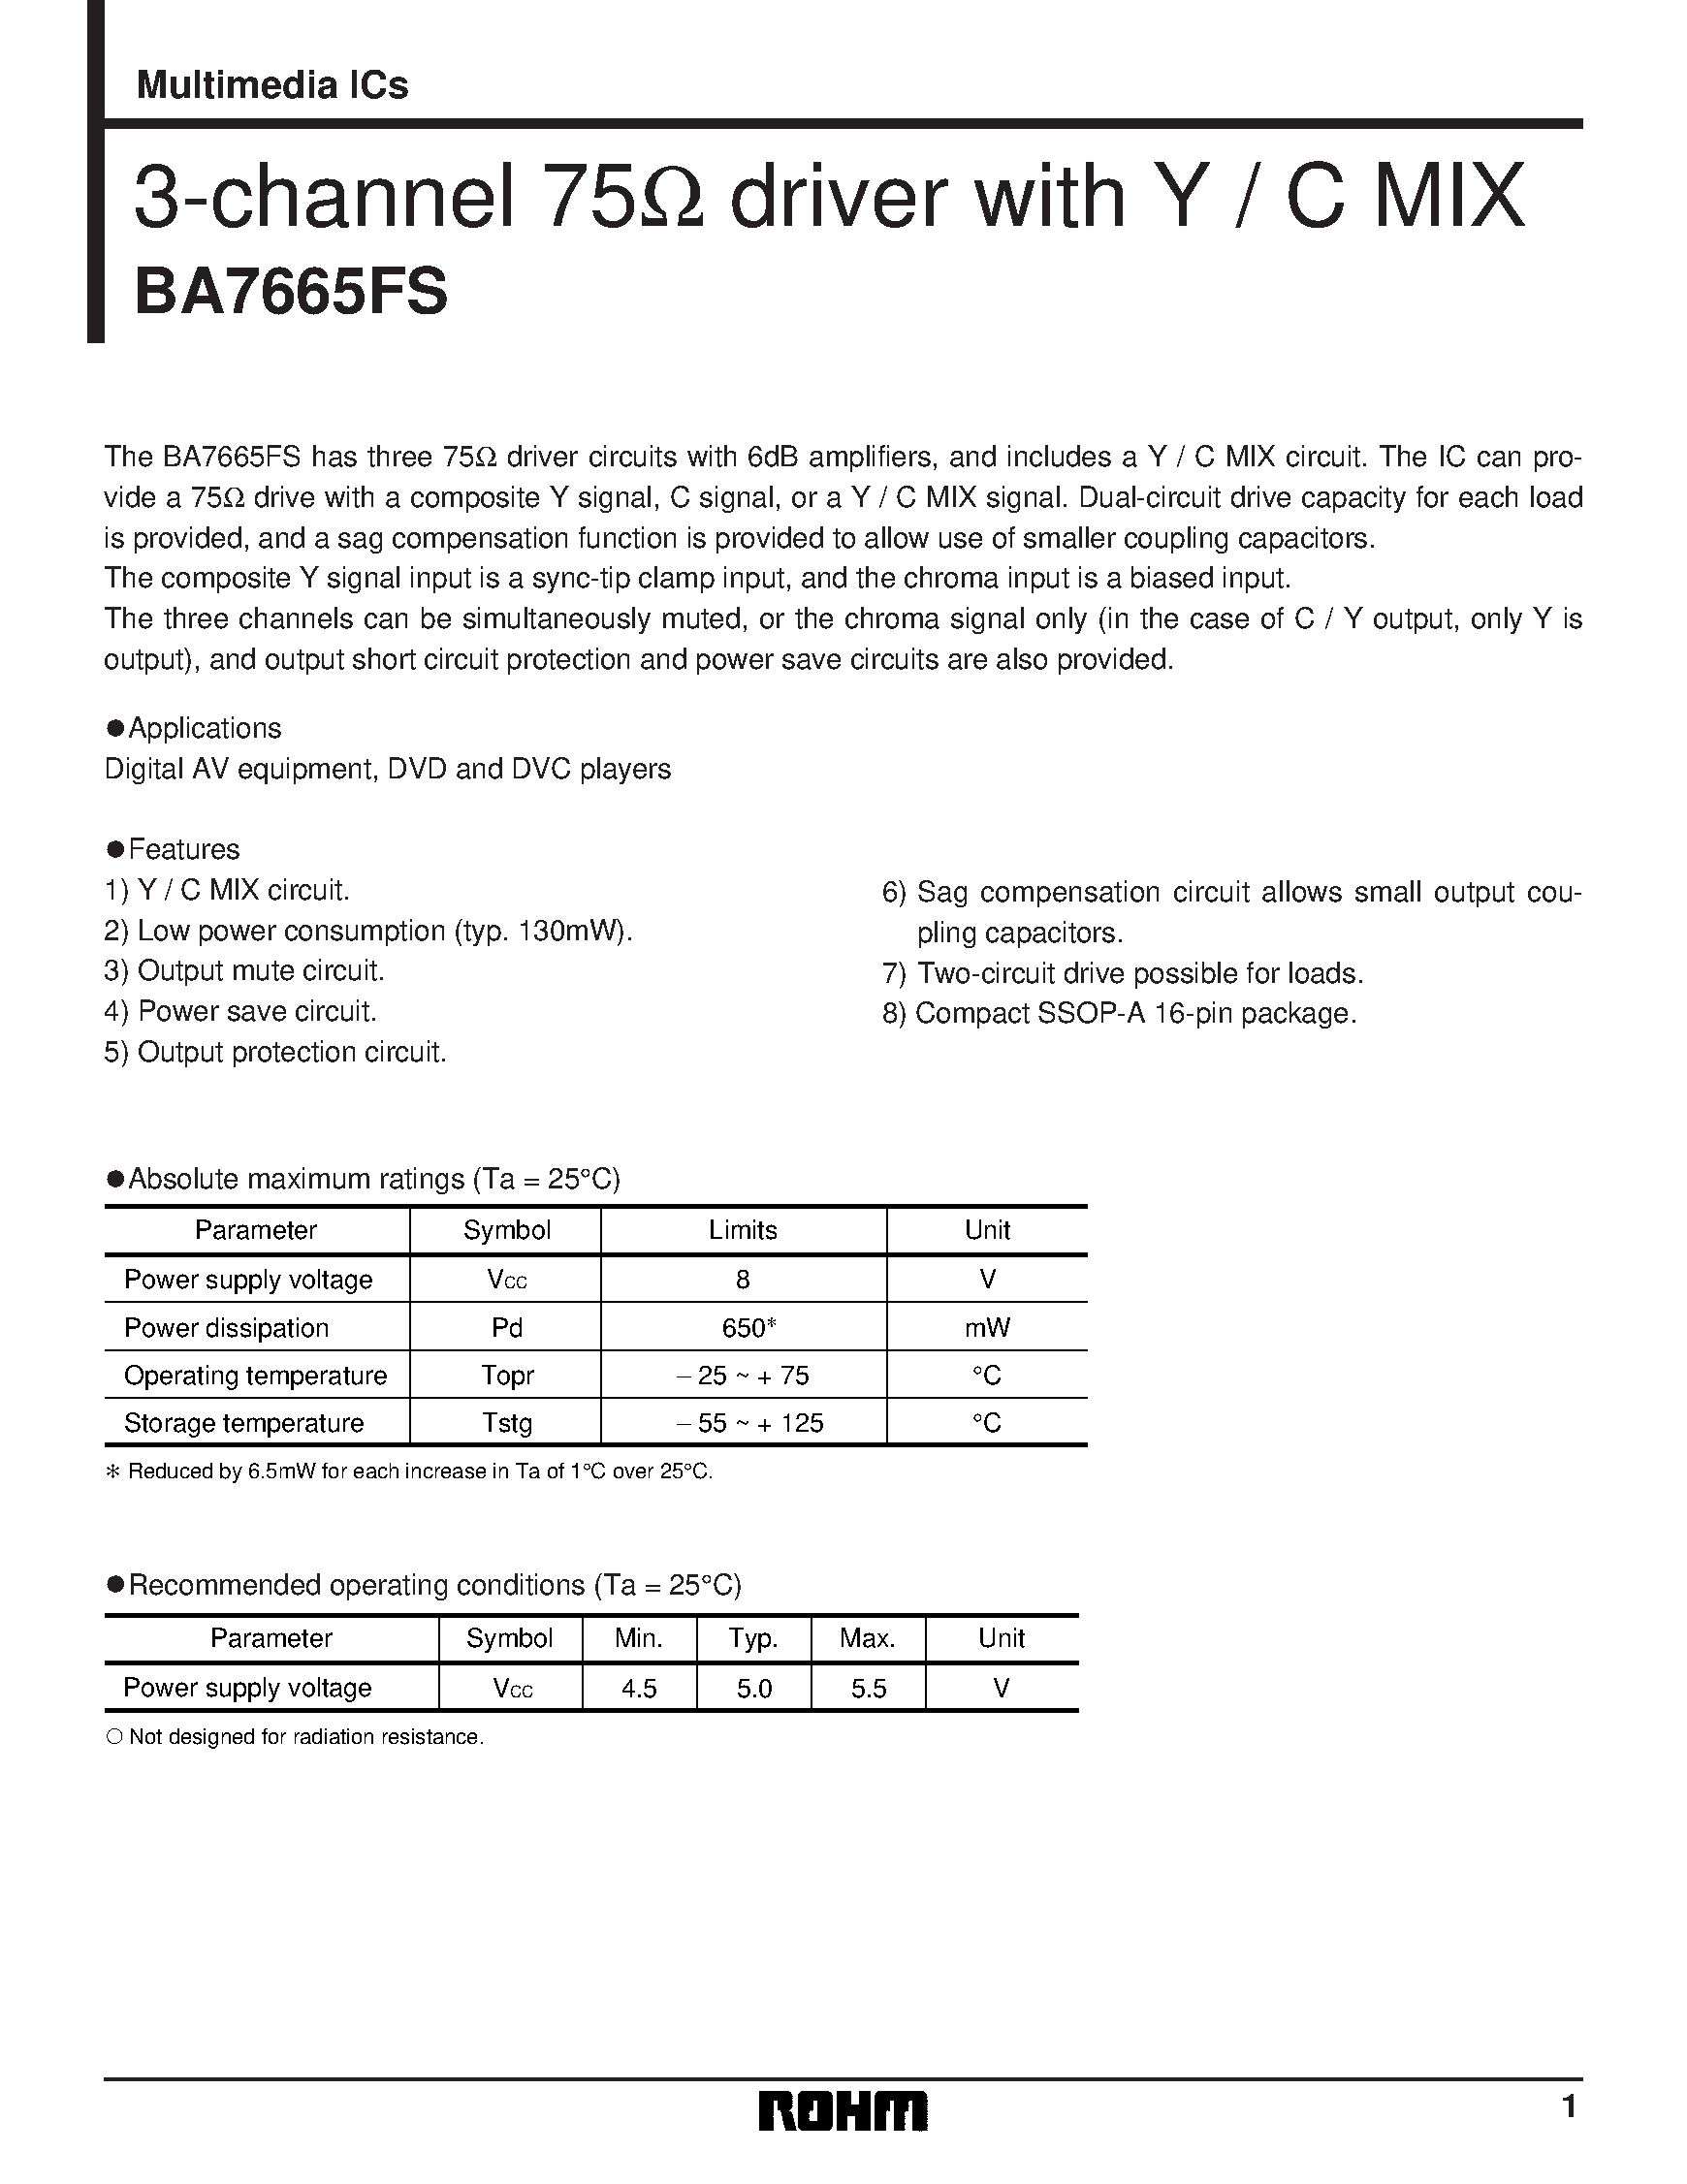 Datasheet BA7665FS - 3-channel 75 driver with Y / C MIX page 1